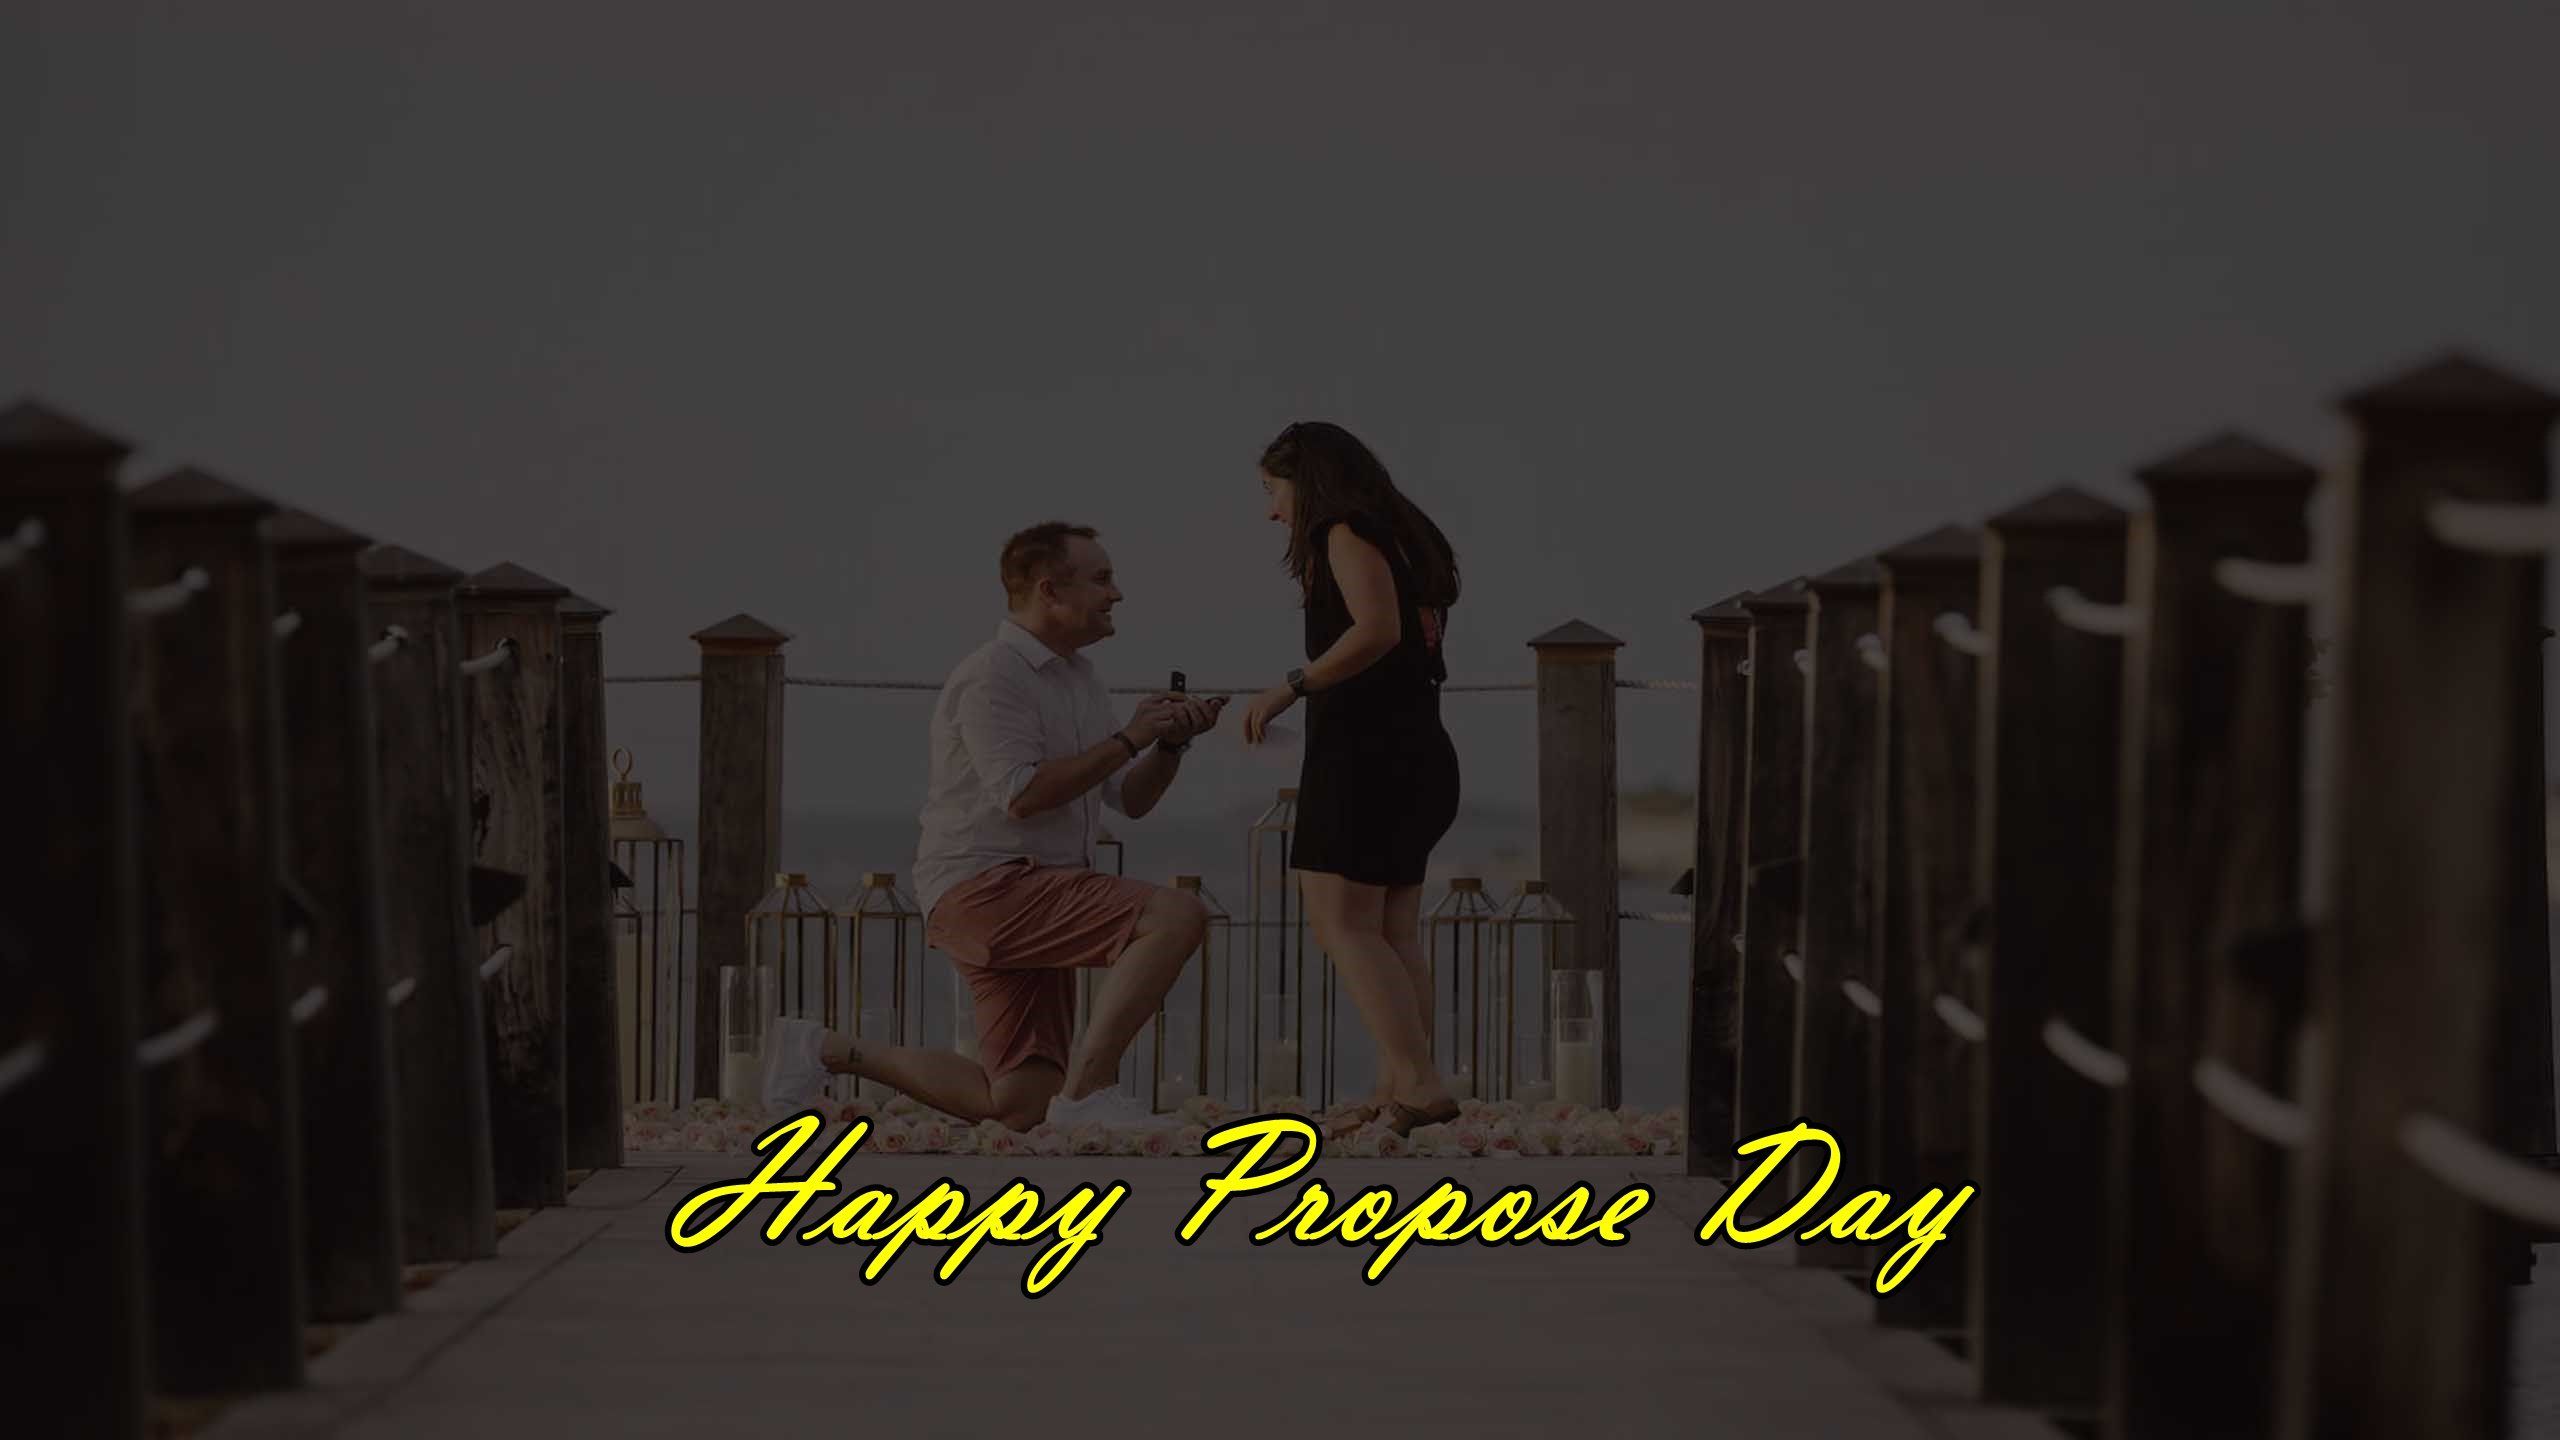 Happy Propose Day Image, Photo, Picture 2021